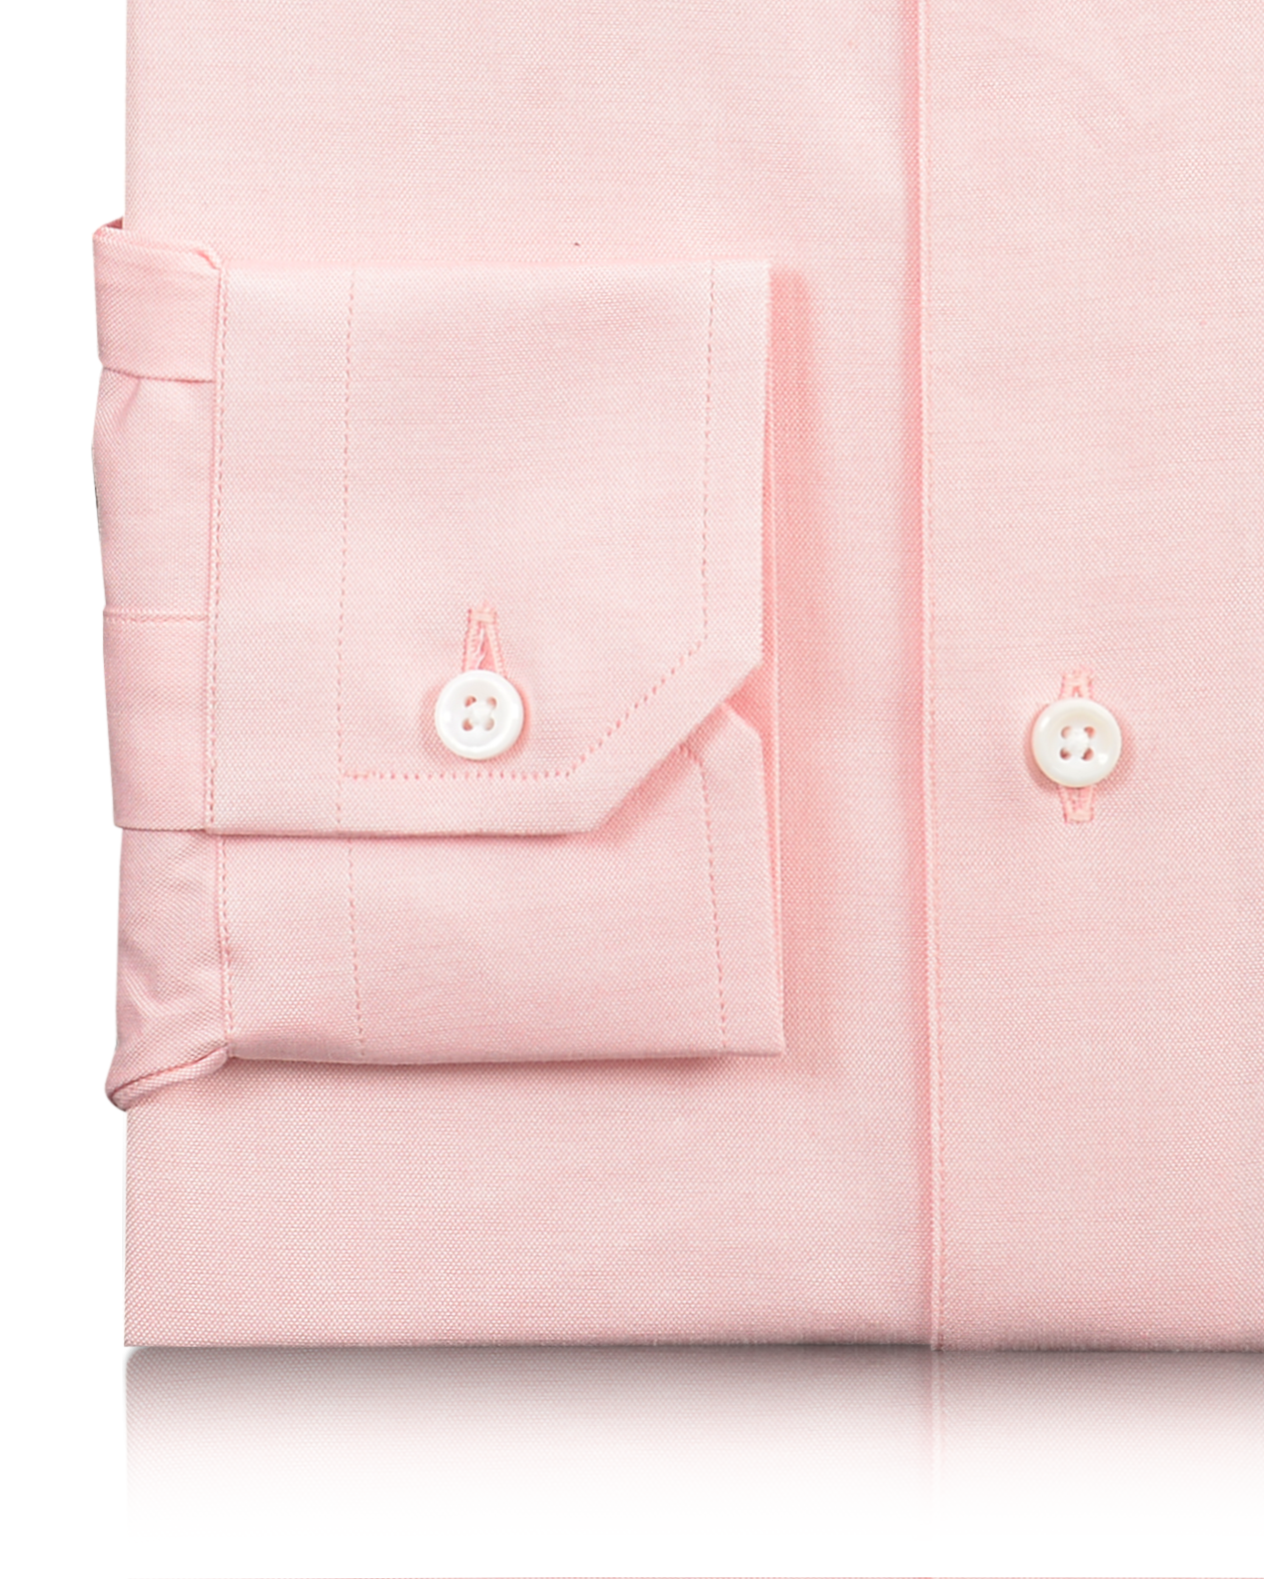 Cuff of the custom oxford shirt for men by Luxire in peach pinpoint